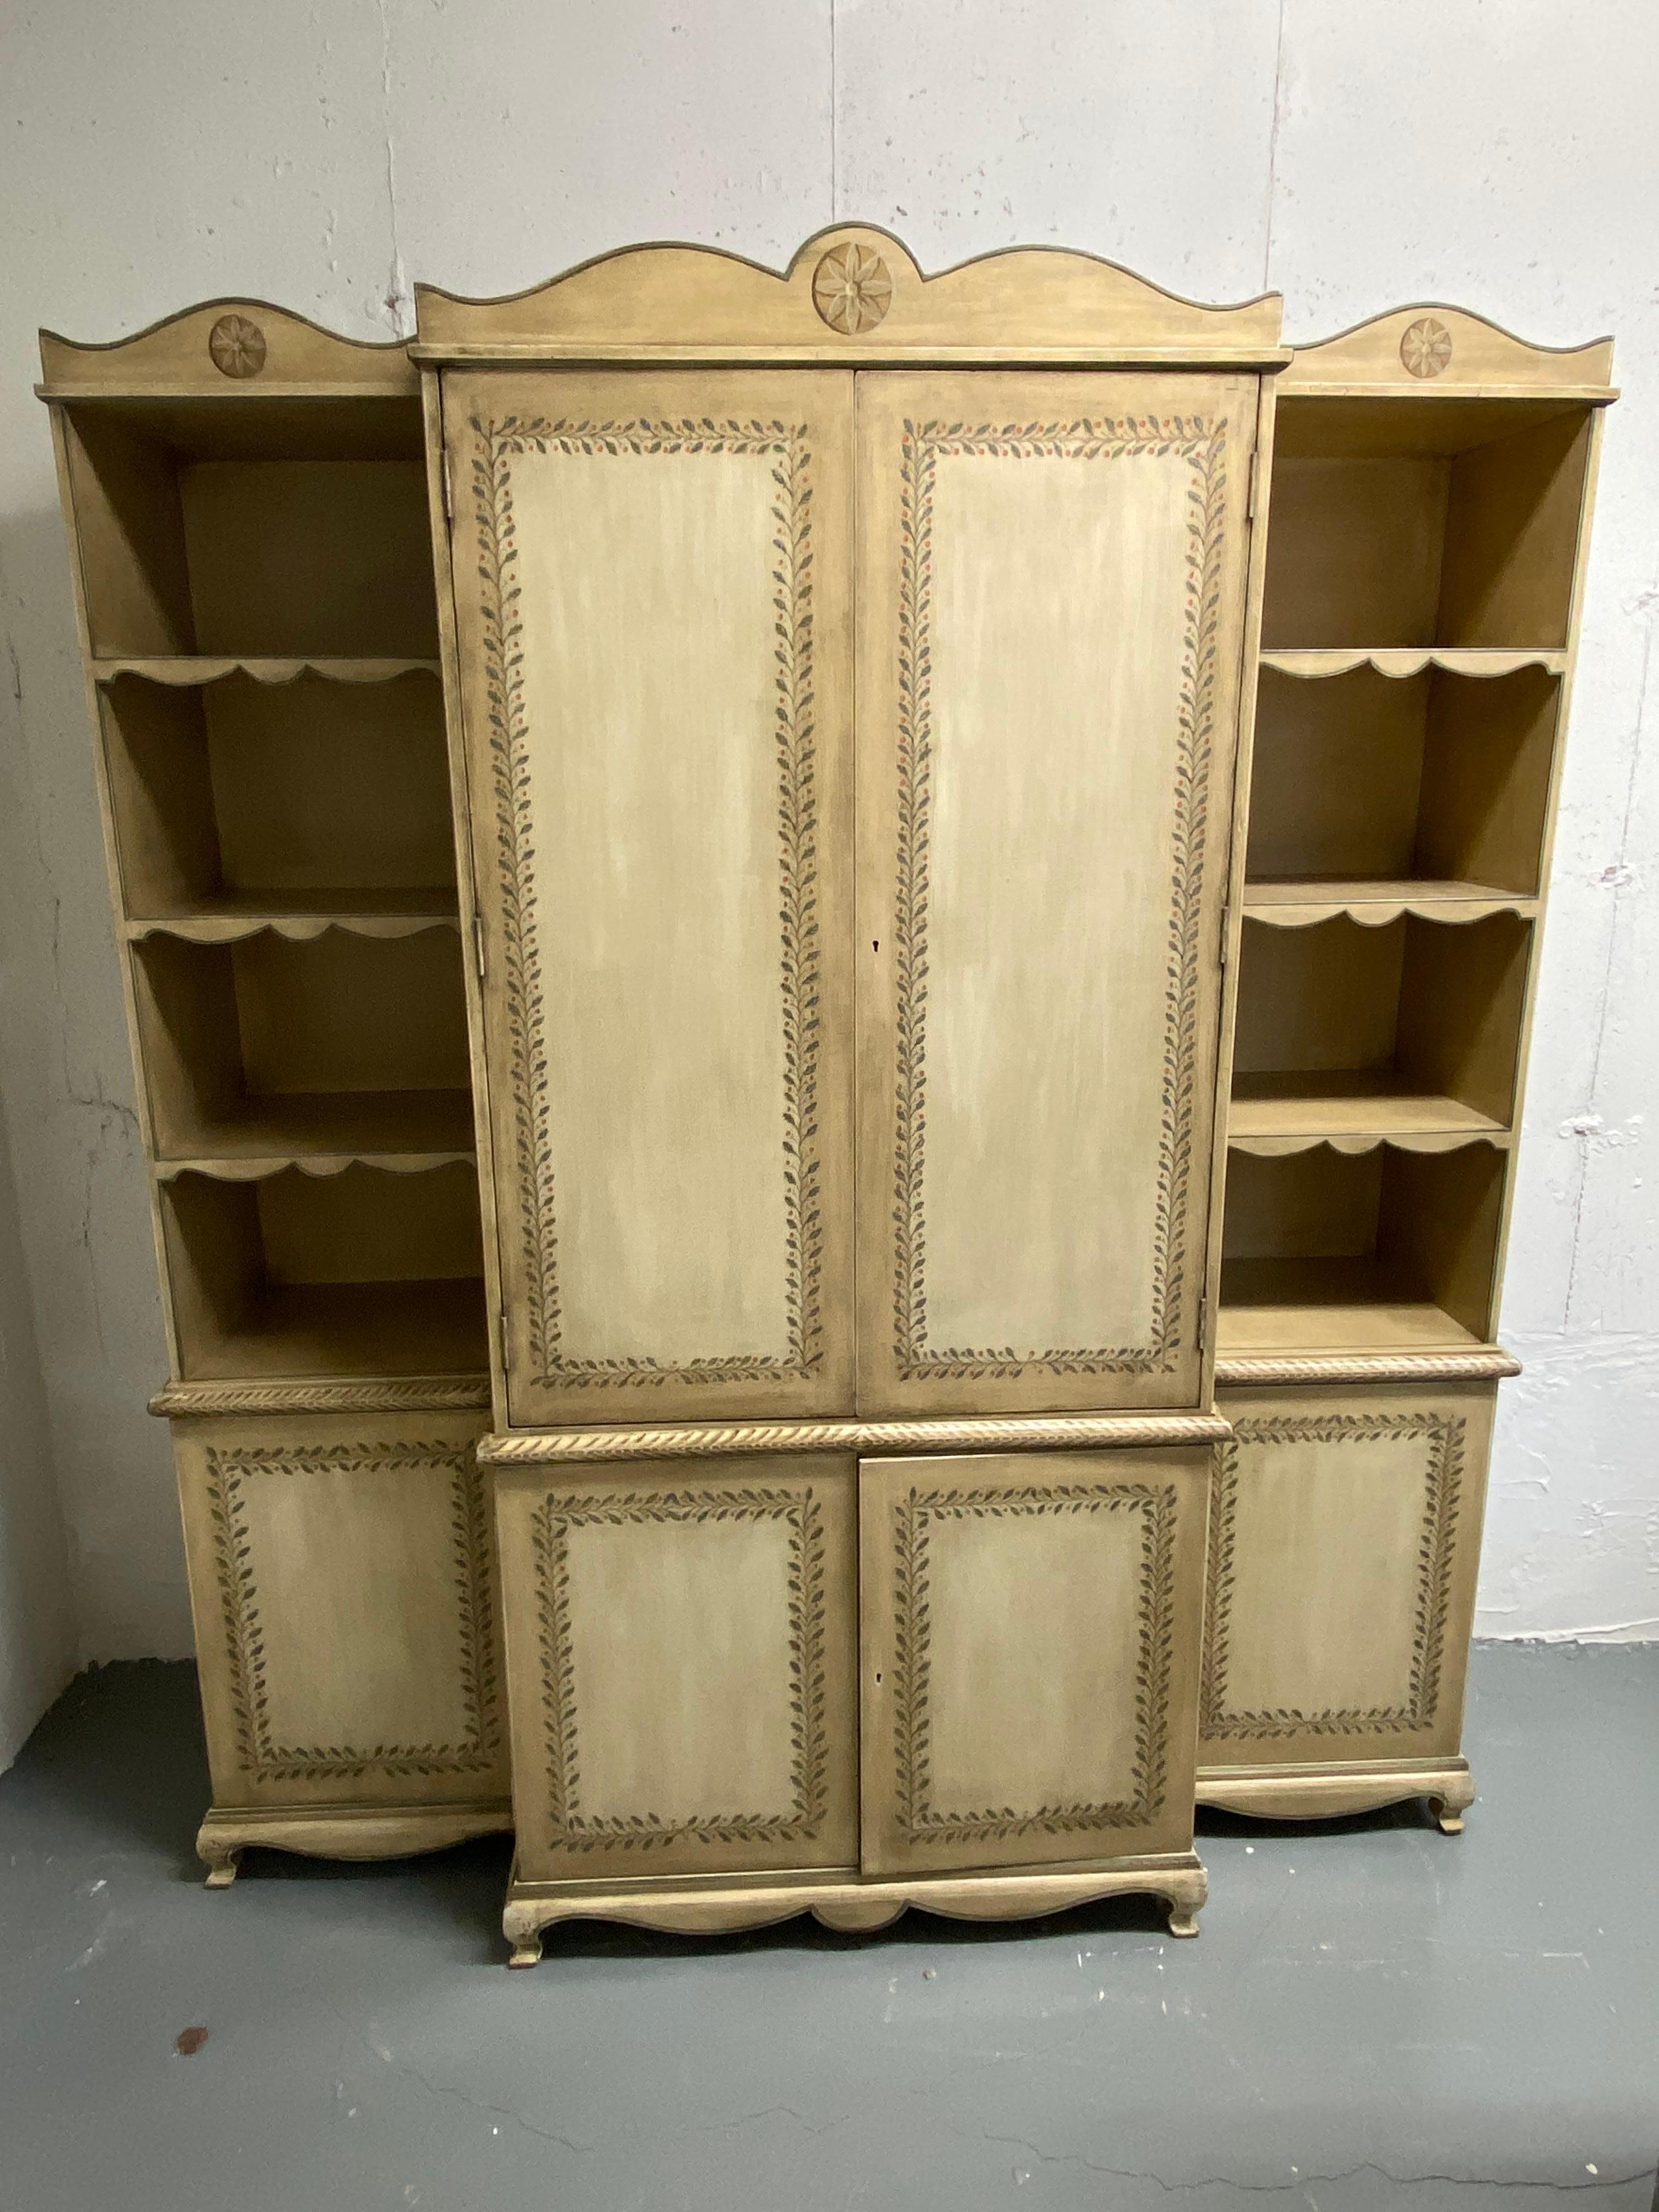 Custom Made & Painted French Provincial Style Cabinet in Painted Leaf Design. A beautifully painted faux finish in an antique white & grey background with green leaf and berry design on the interior perimeter of each door.  Louis XVth styling on